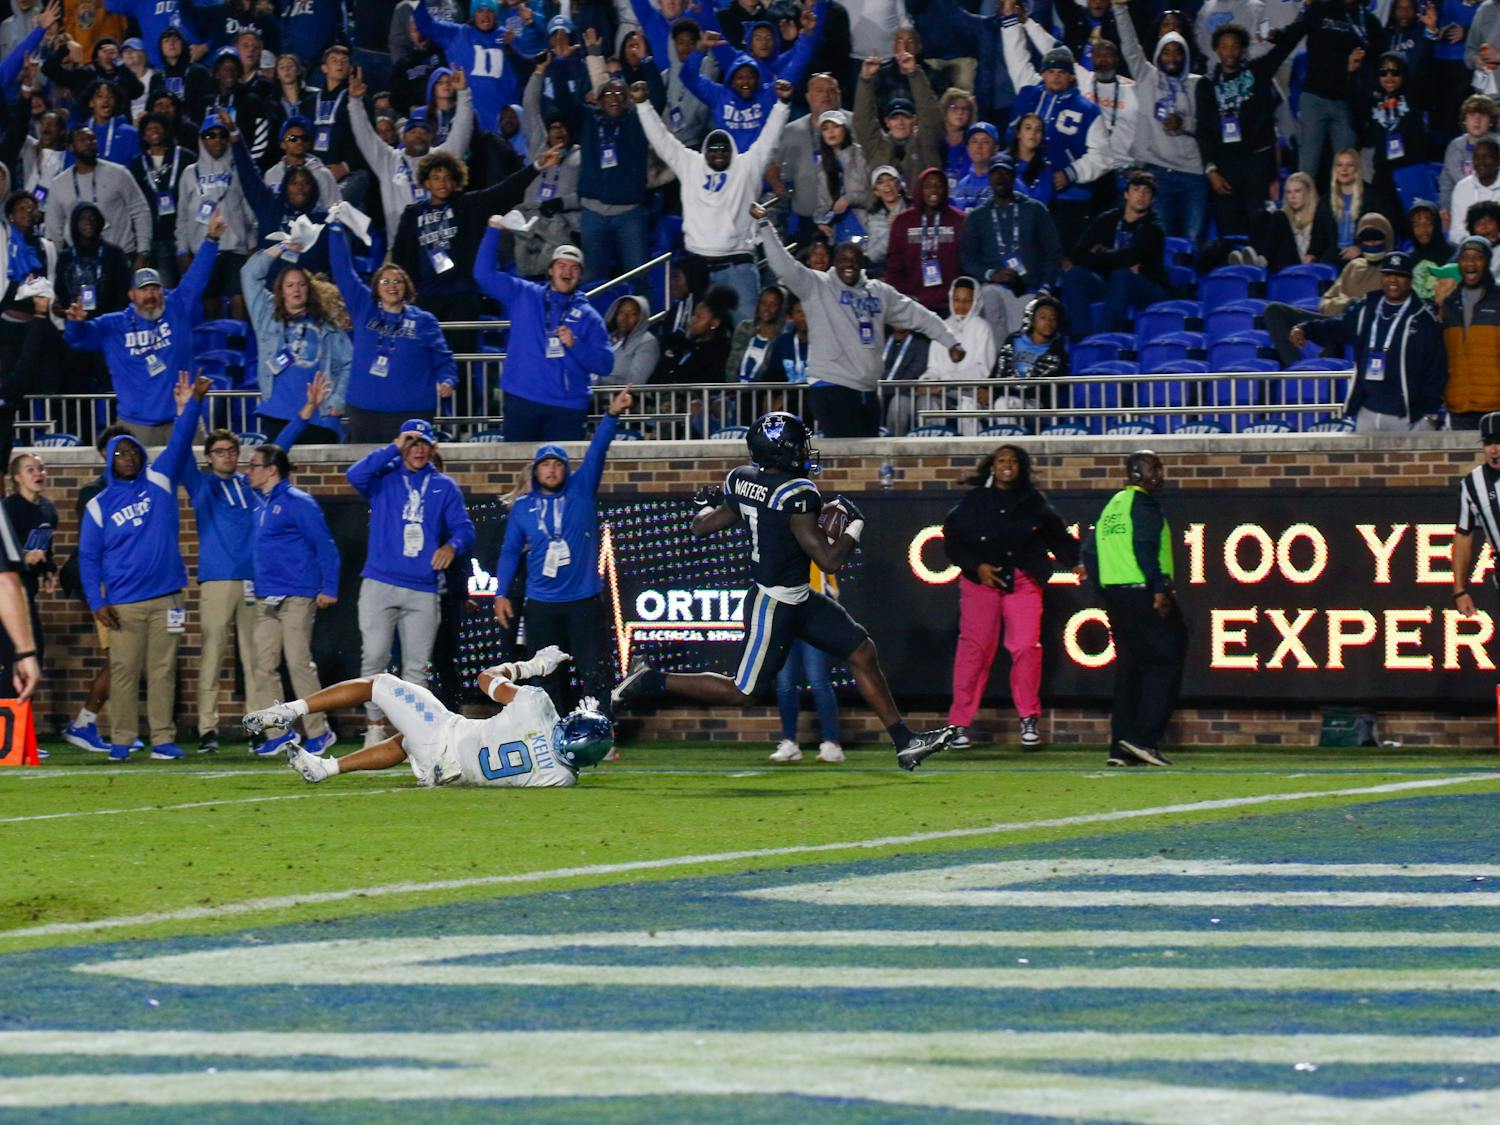 Just eight games into head coach Mike Elko's tenure, the Blue Devils have provided plenty of reason for excitement in Durham.